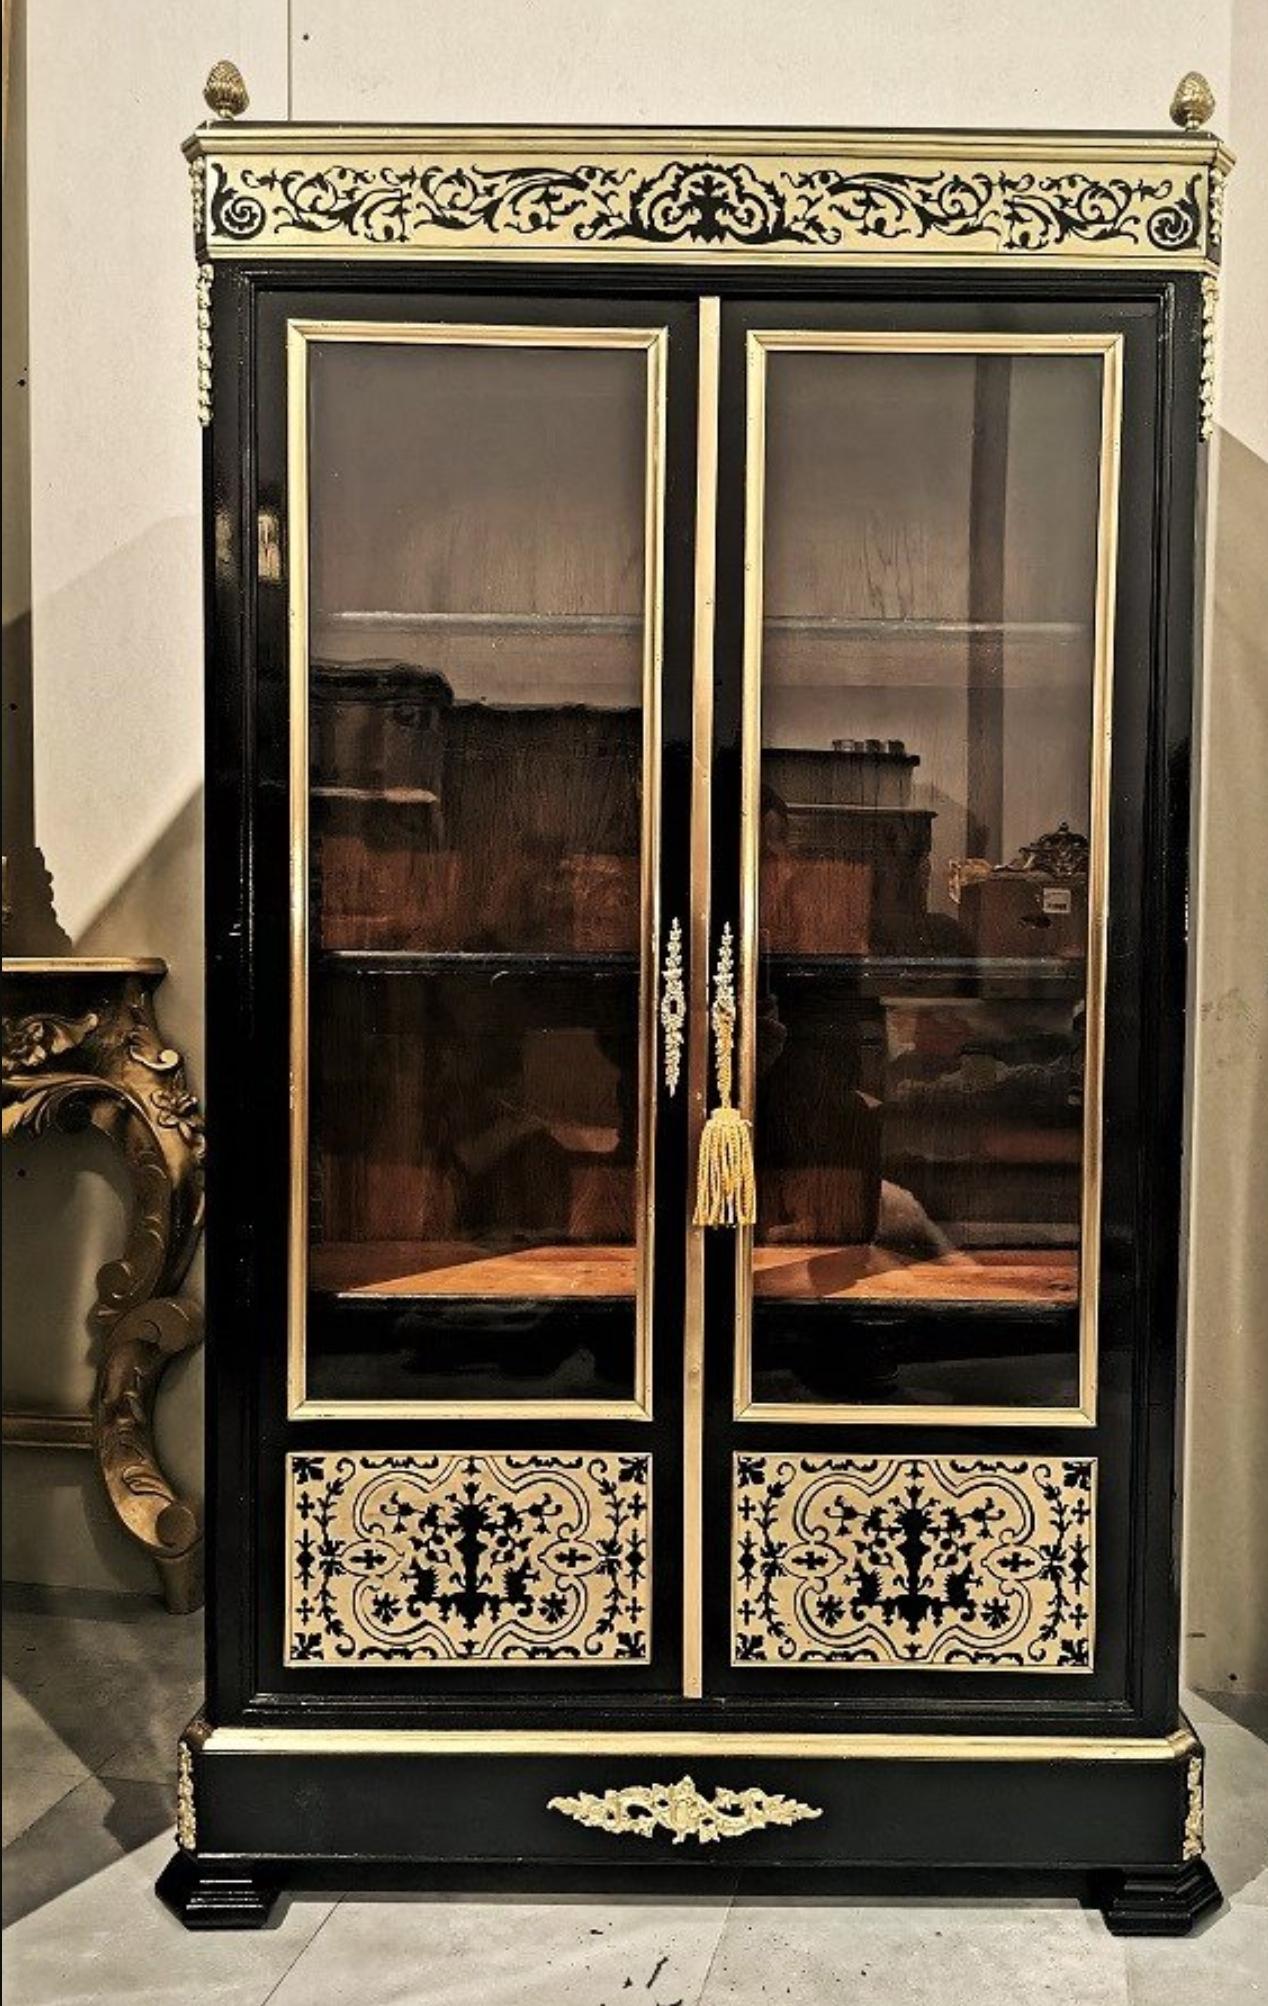 Napoleon III pair of vitrines bookshelves in Boulle style, each one has 2 front doors in beautiful Boulle style brass marquetry on an ebony veneer. The marquetry is made with fine positive and negative contreparts. Gorgeous ornamentations in golden